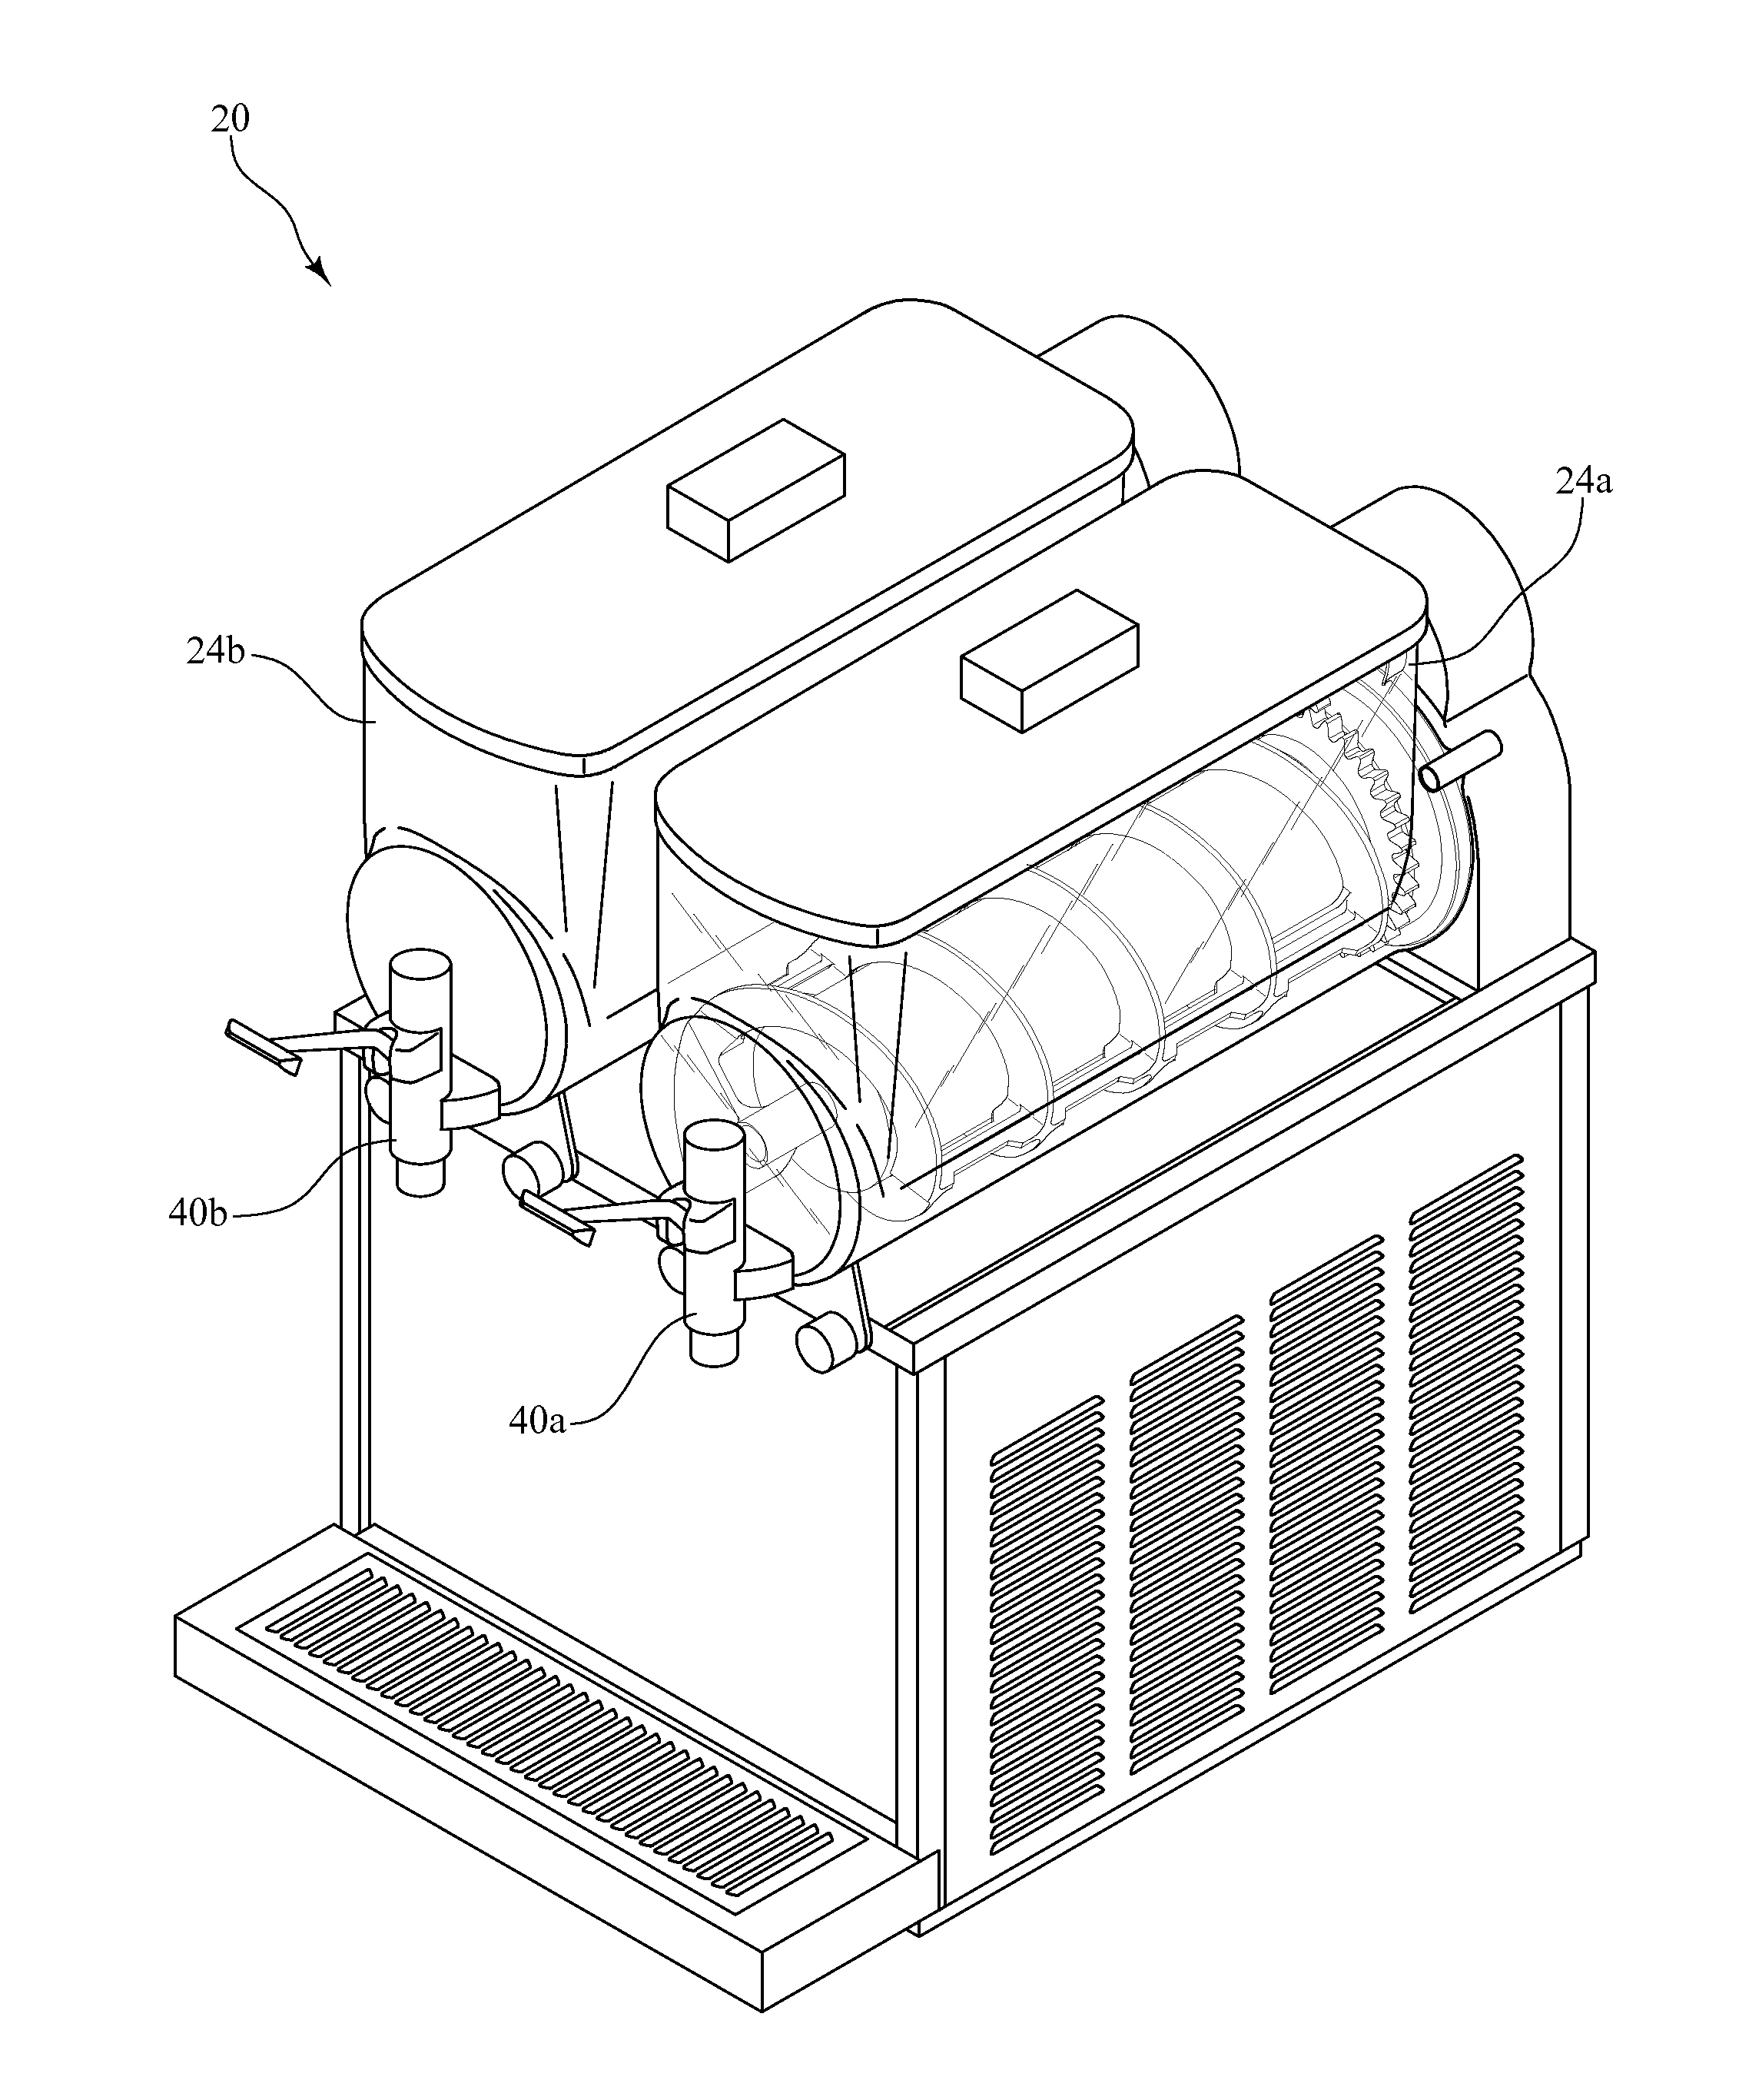 Beverage dispenser for partially frozen beverages with an improved drive and sealing system